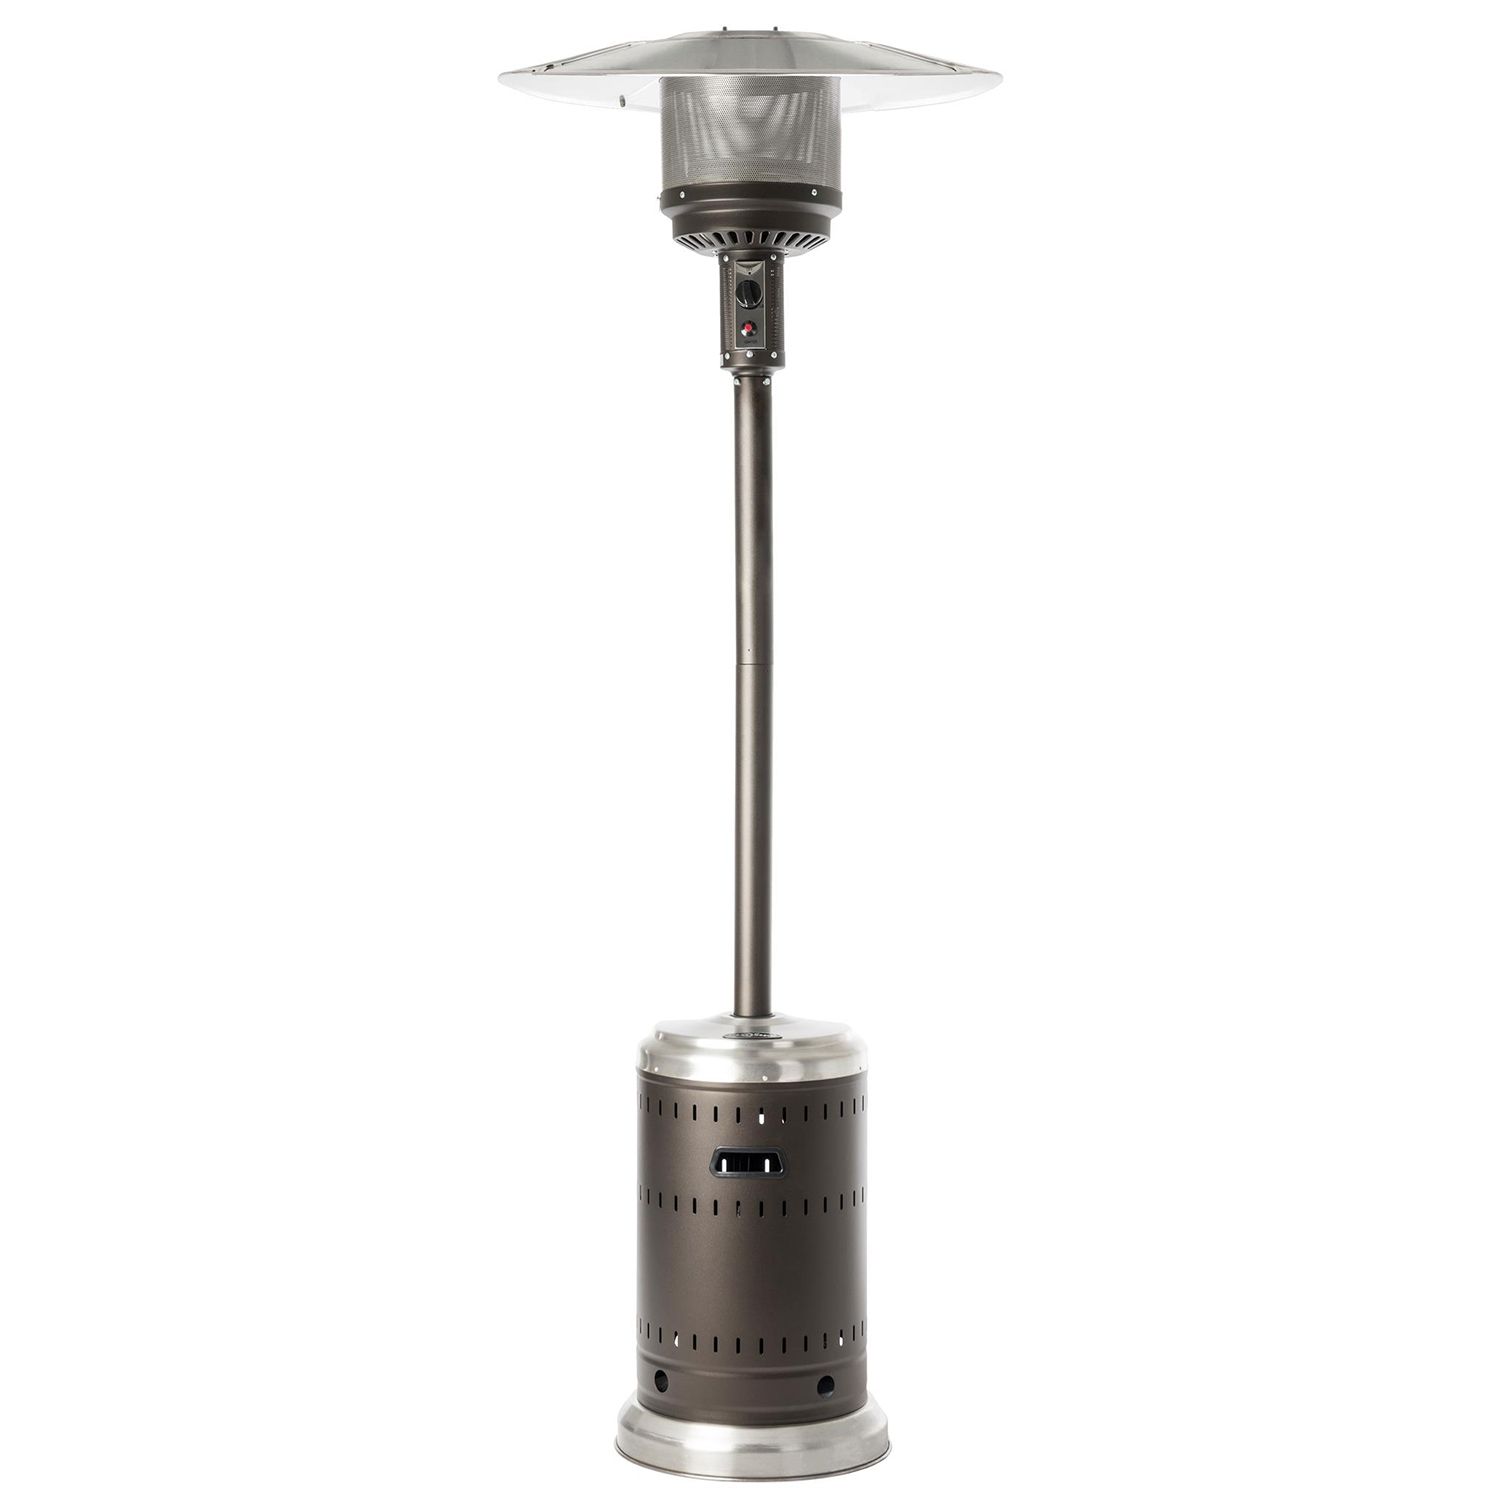 Fire Sense 46,000 BTU Patio Heater in Ash and Stainless Steel Finish